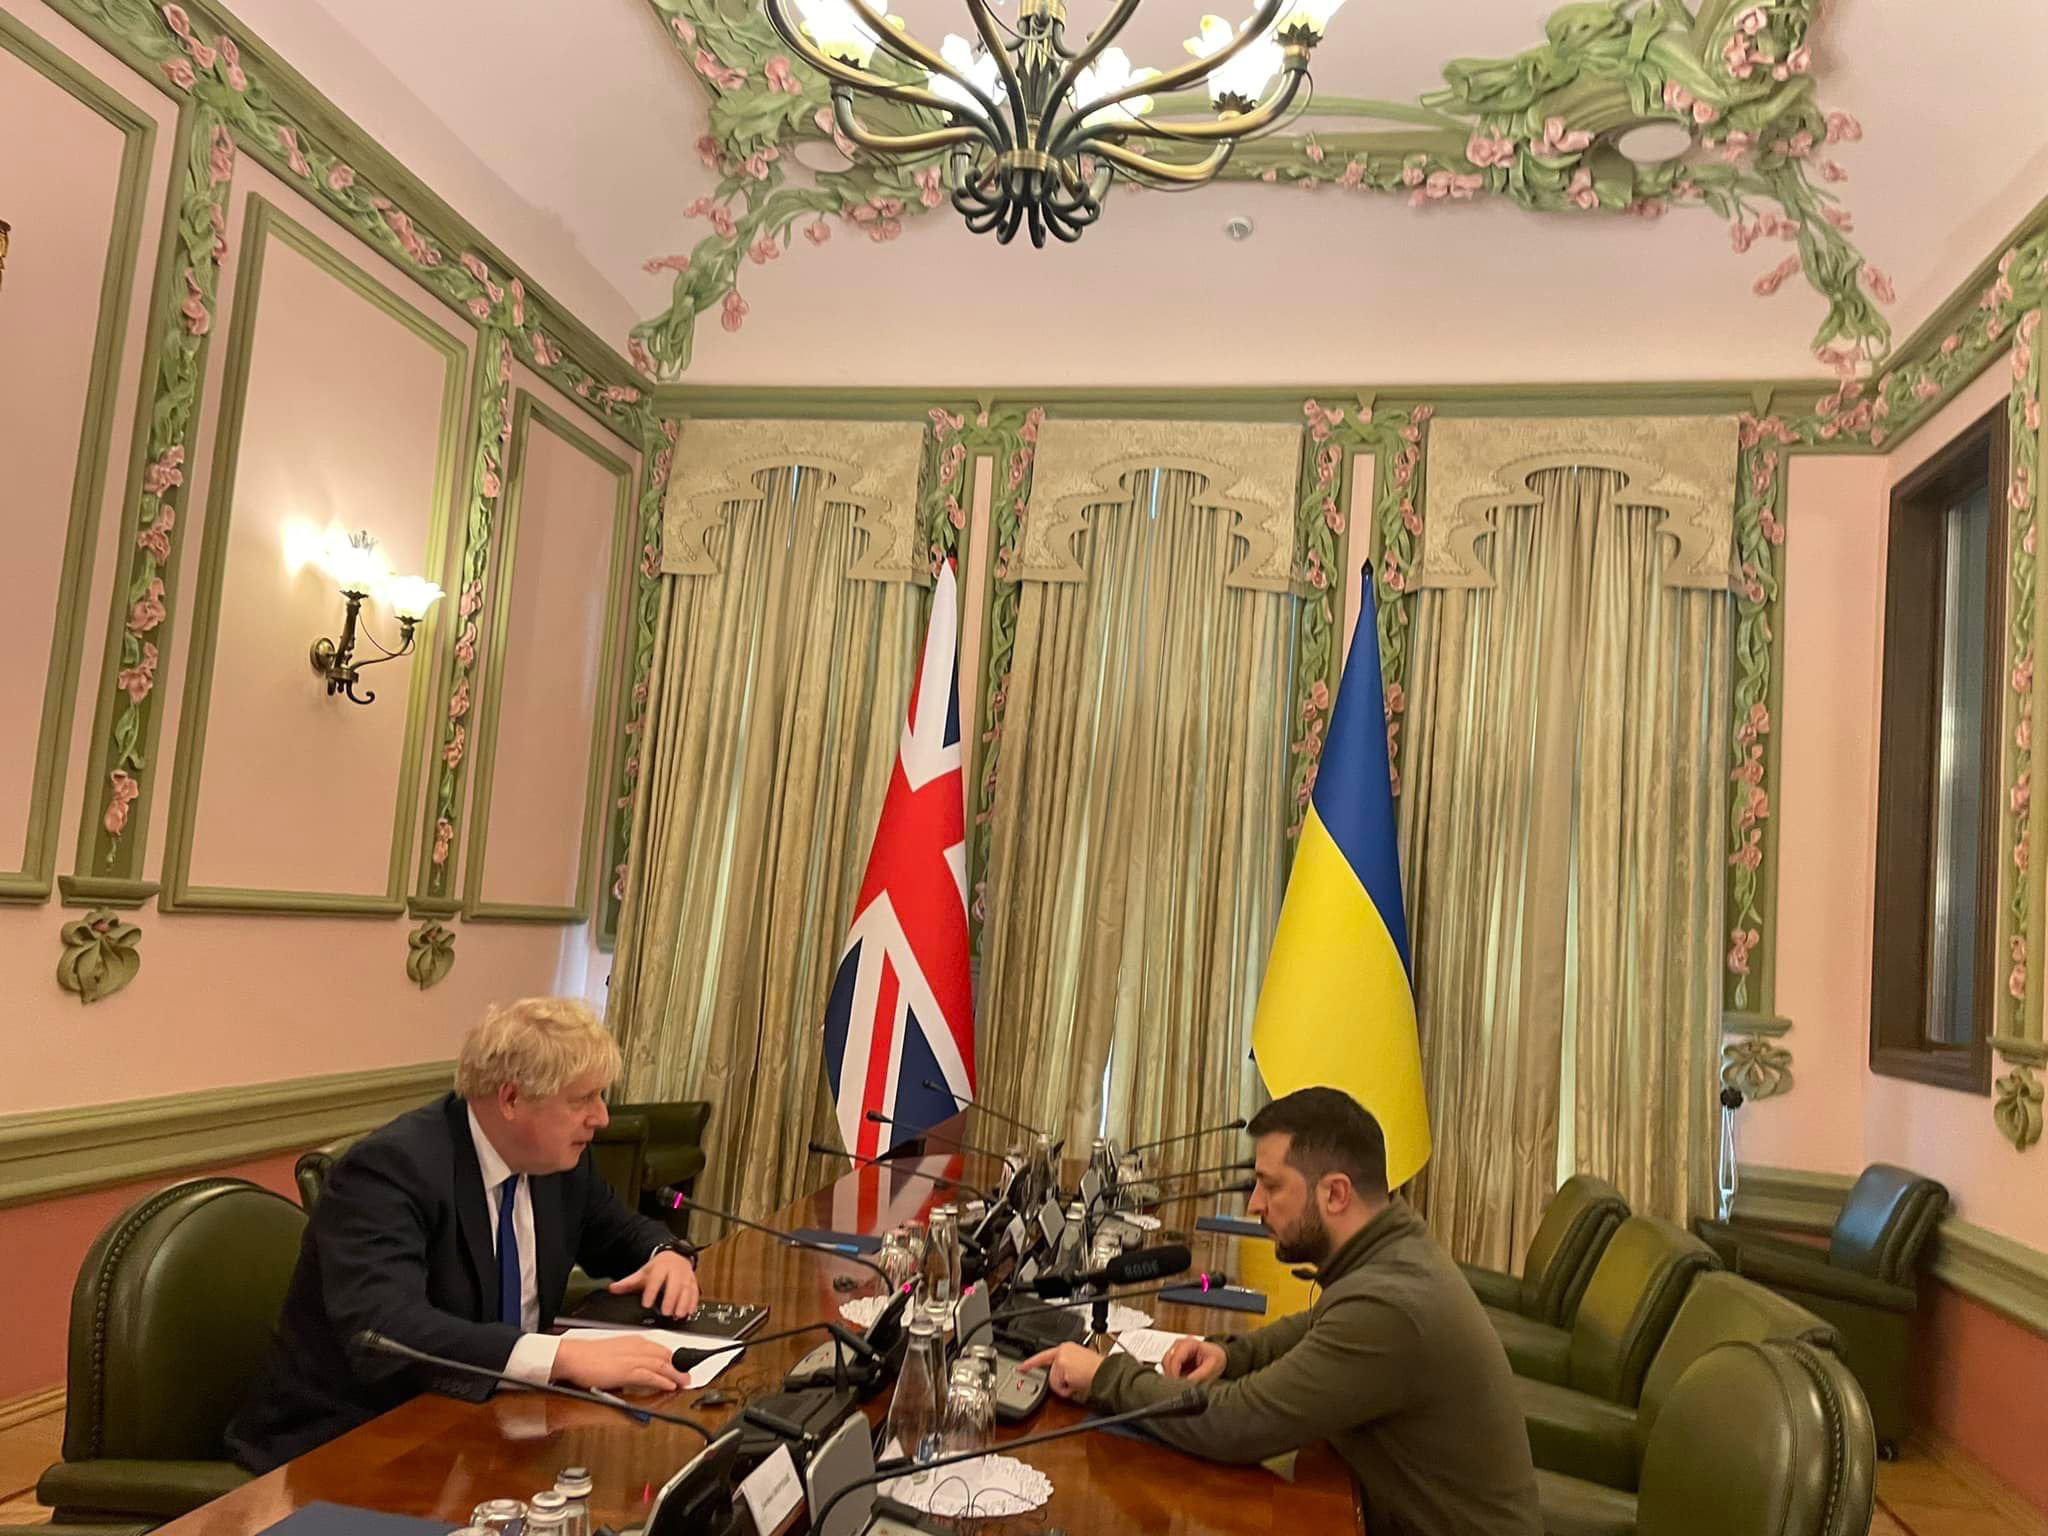 UK Prime Minister Boris Johnson meets with Ukrainian President Volodymyr Zelensky in this photo shared by the Embassy of Ukraine to the UK. 